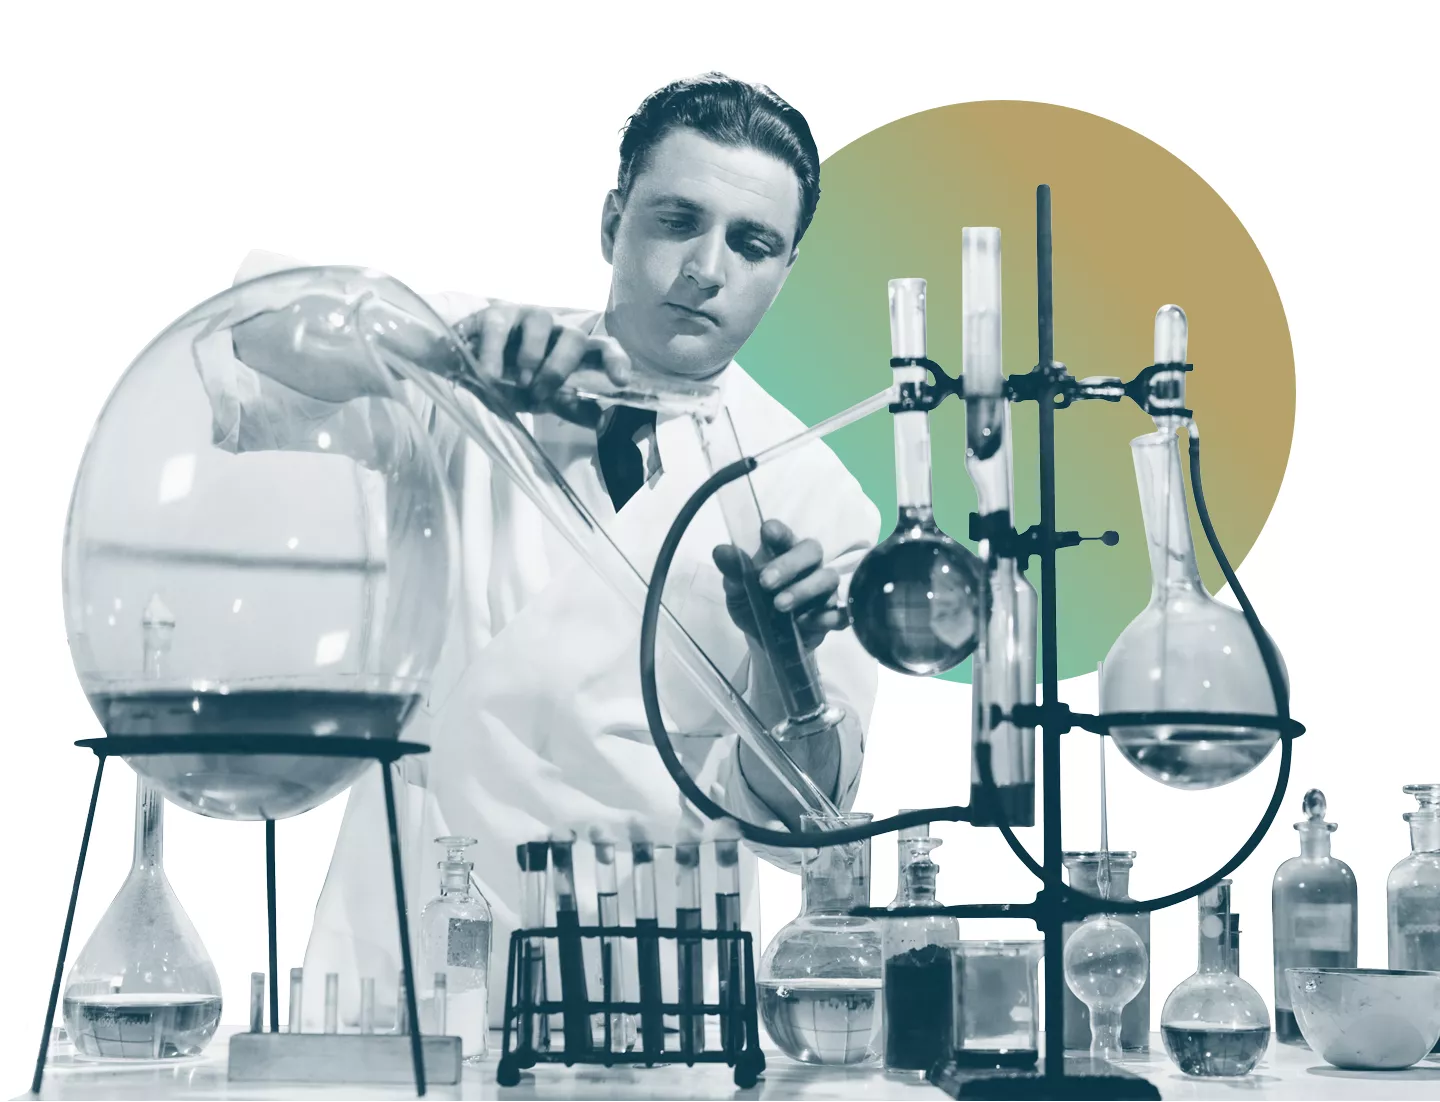 A Scientist Mixing Chemicals on Test Tubes